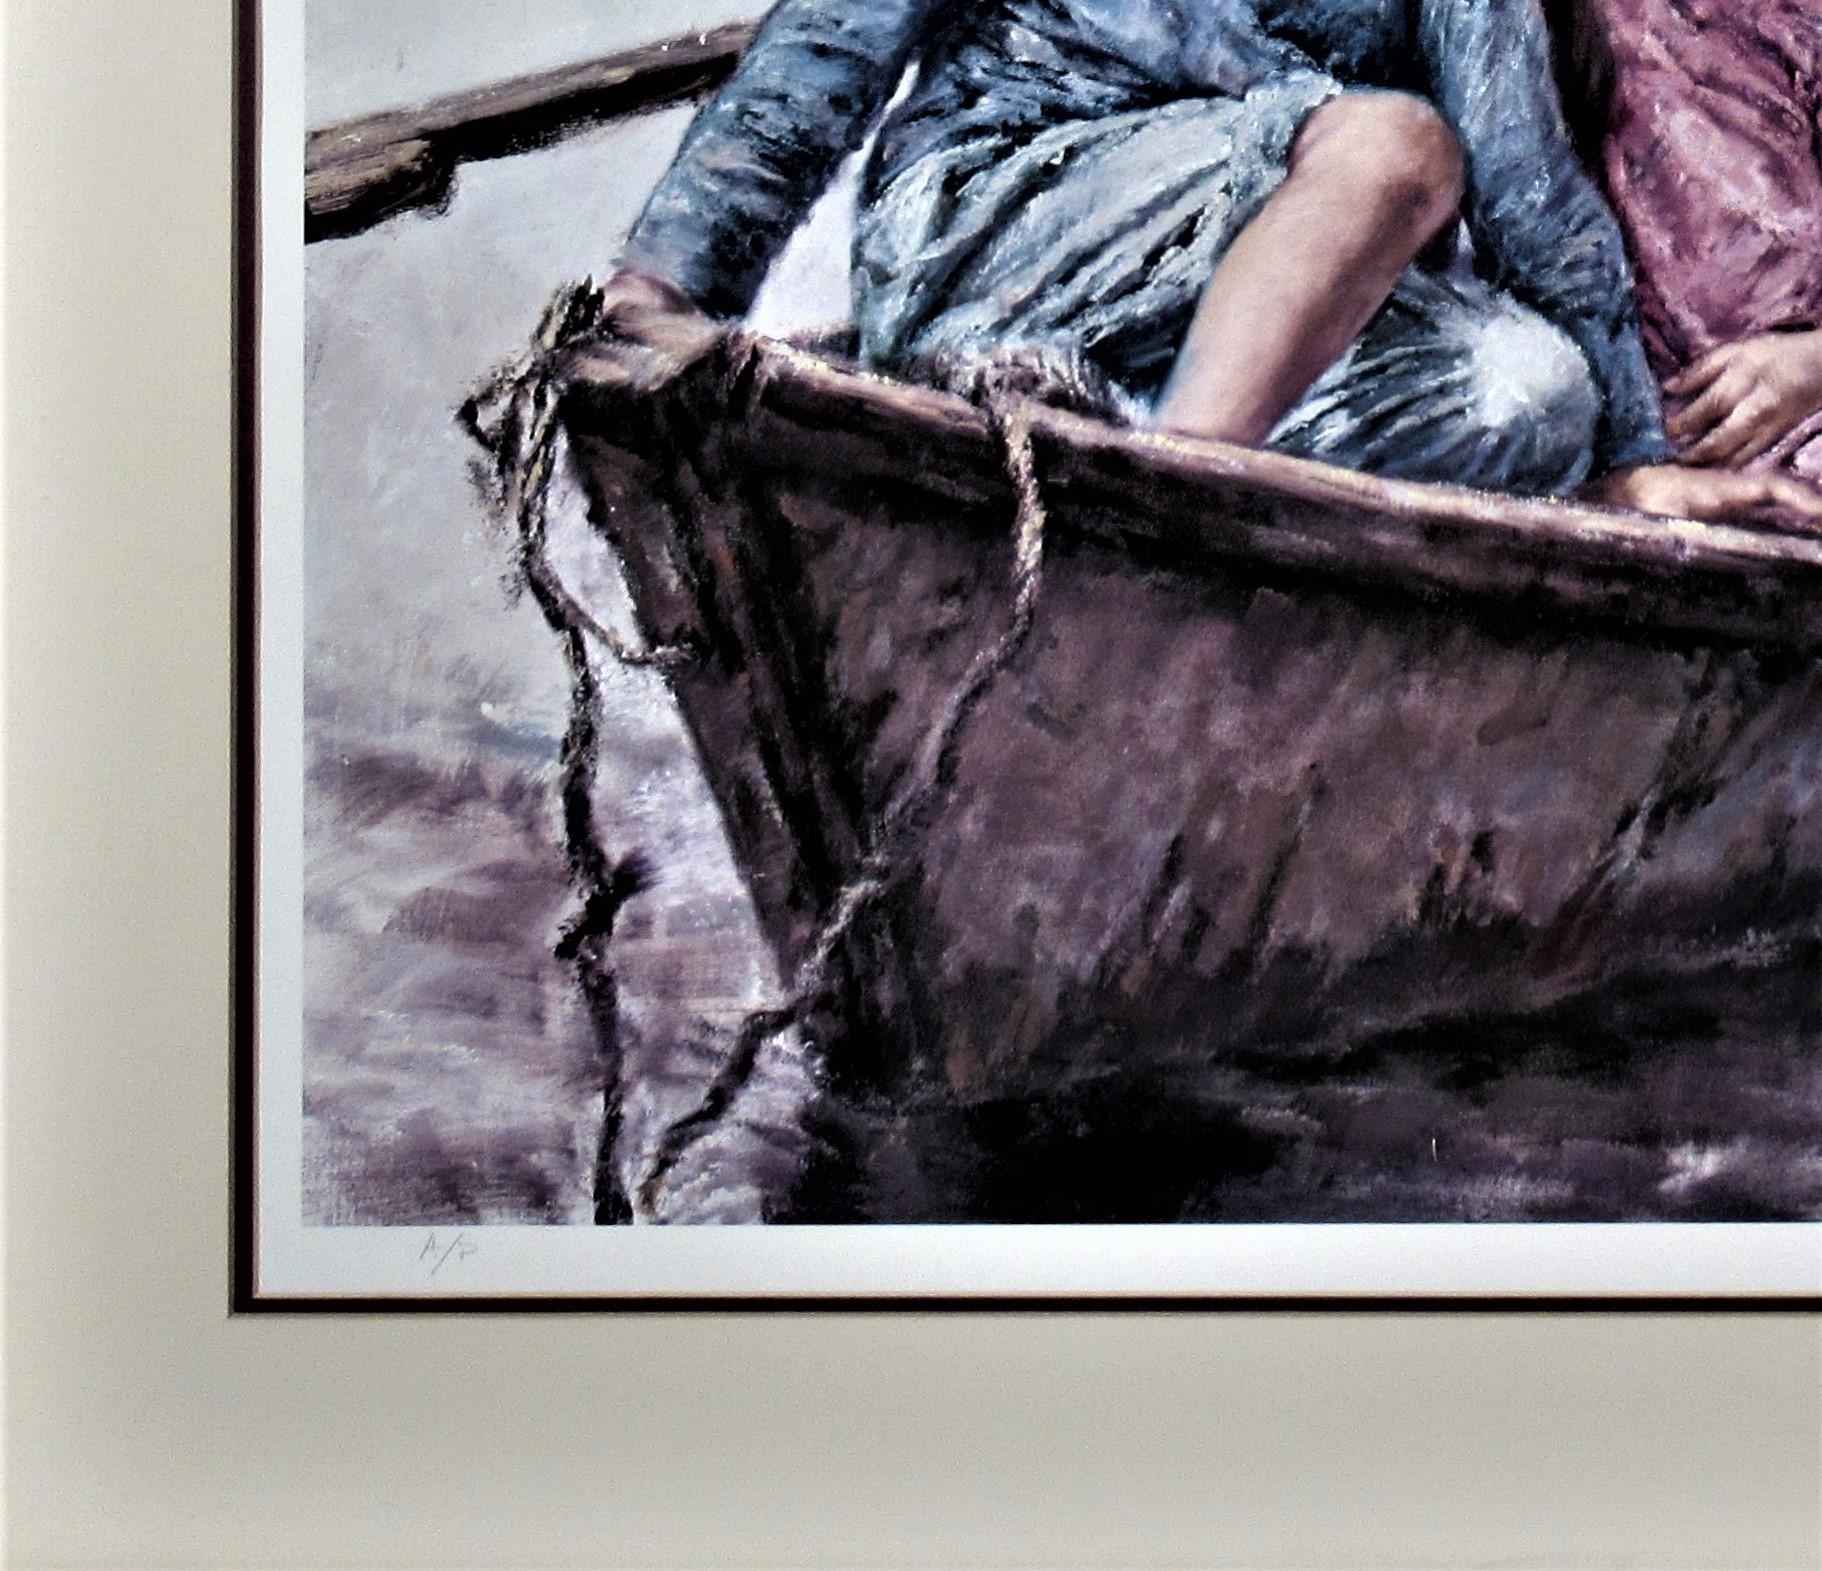 Children in a Boat - Realist Print by Wai Ming (aka Lo Hing Kwok)